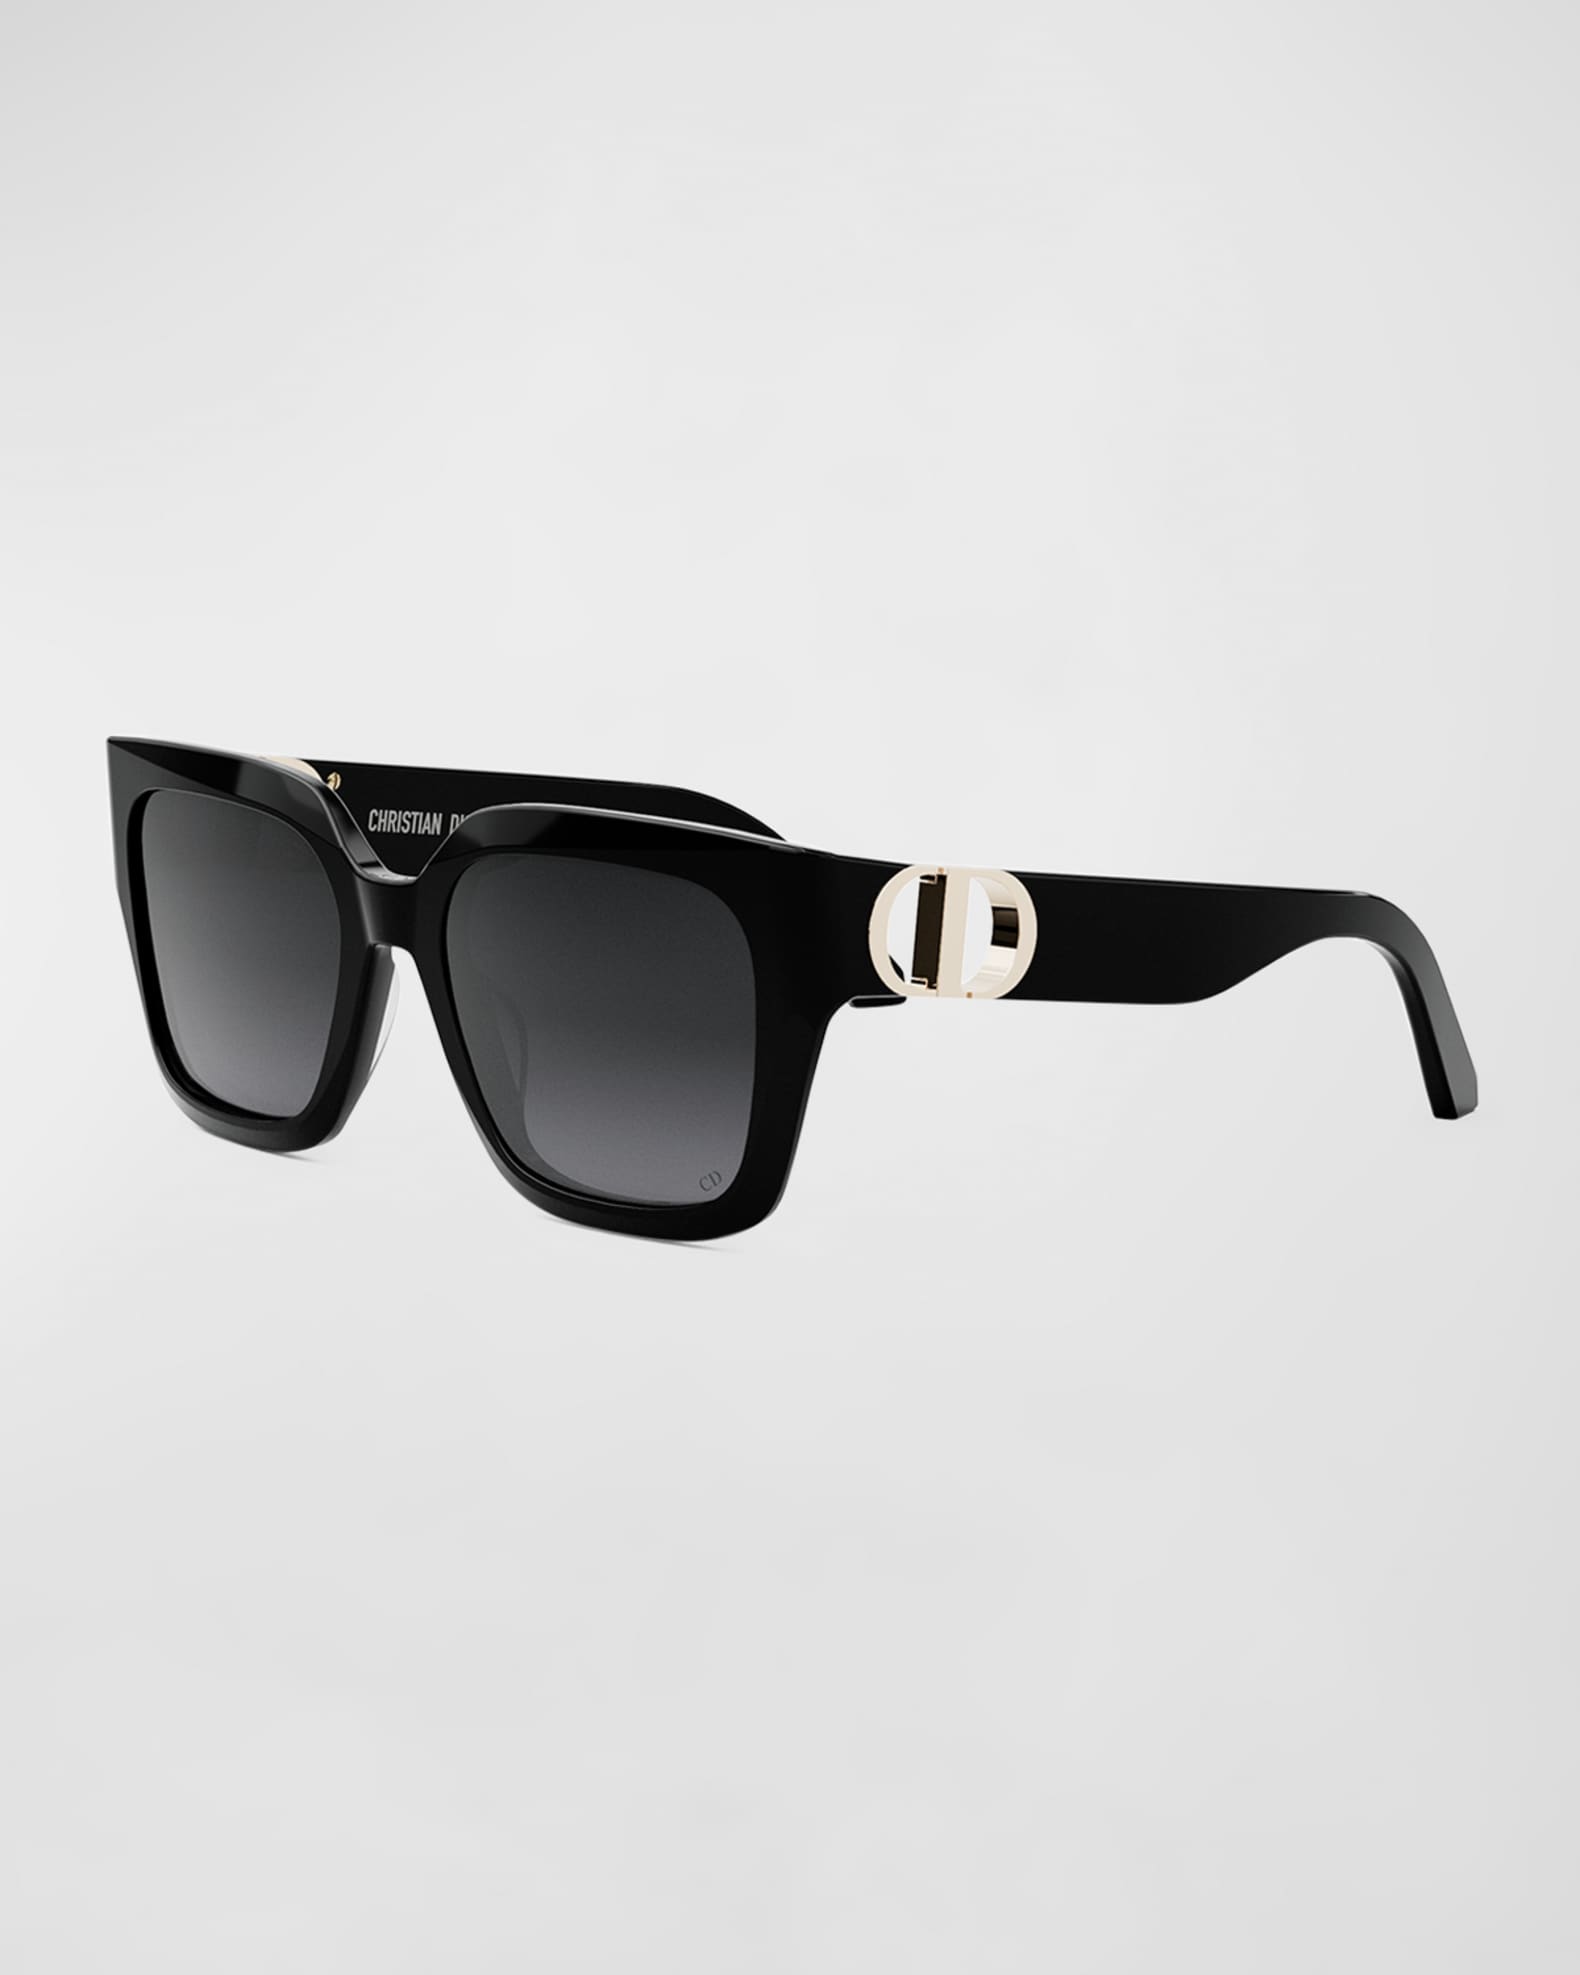 Need help finding these Bottega Sunglasses? : r/DHgate